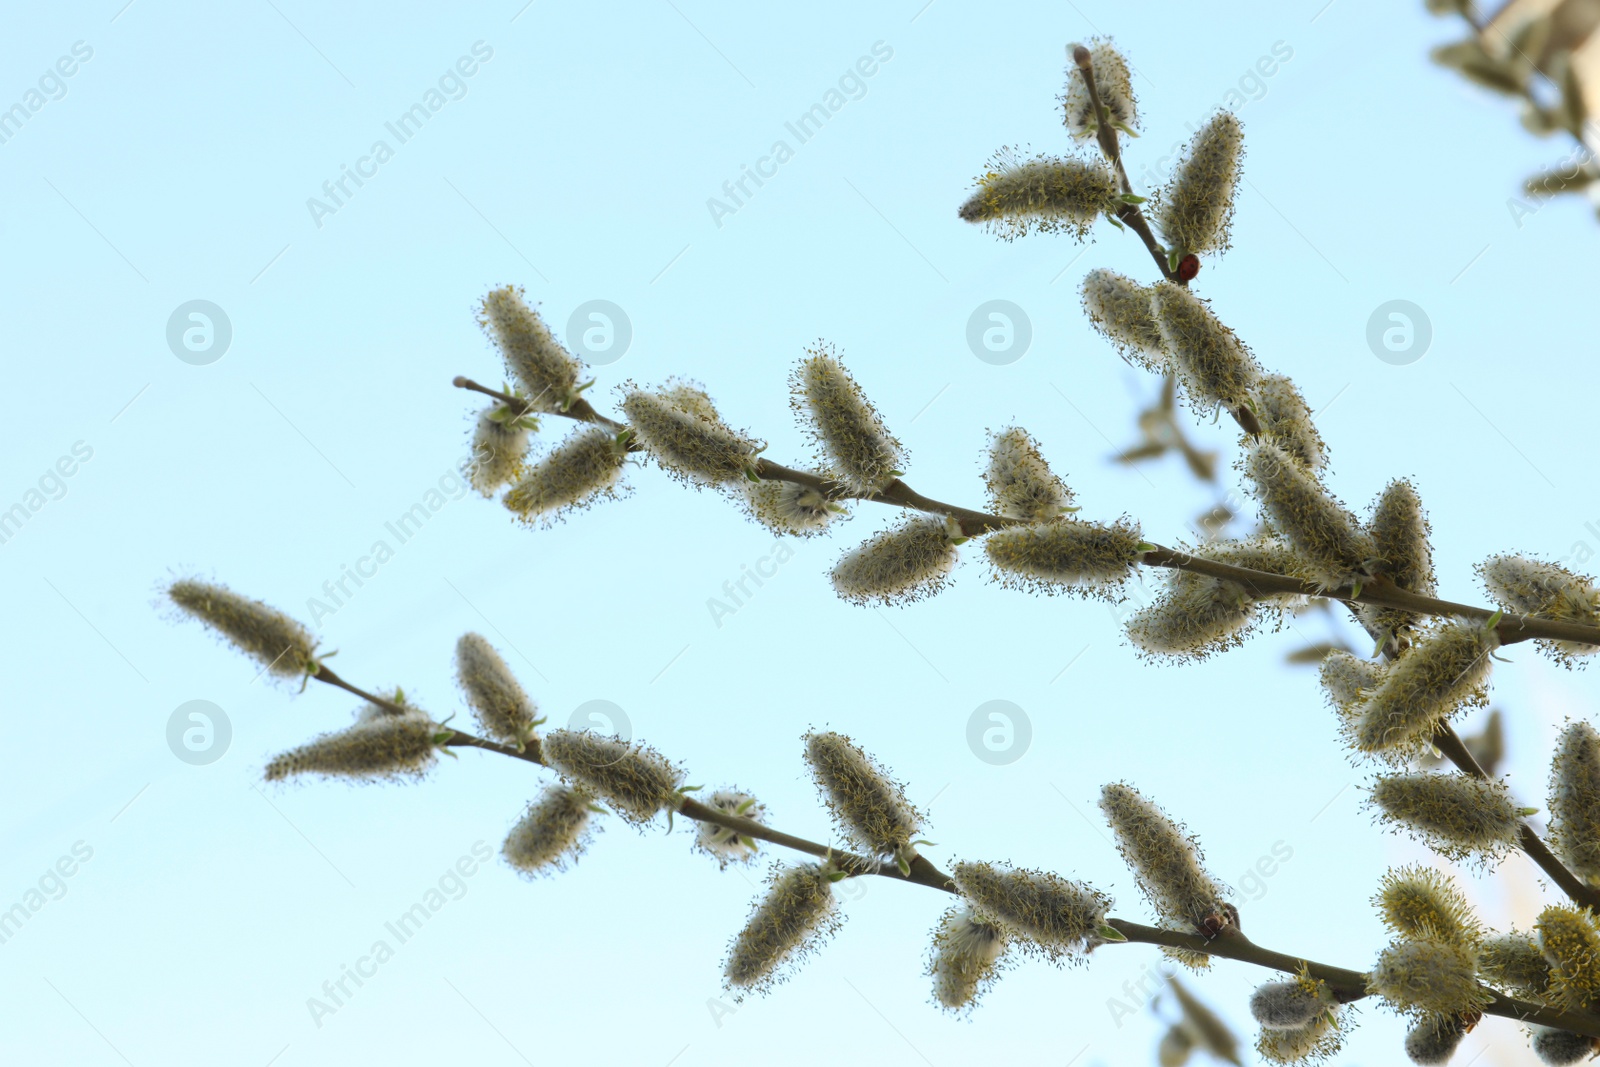 Photo of Beautiful view of pussy willow branches against blue sky outdoors